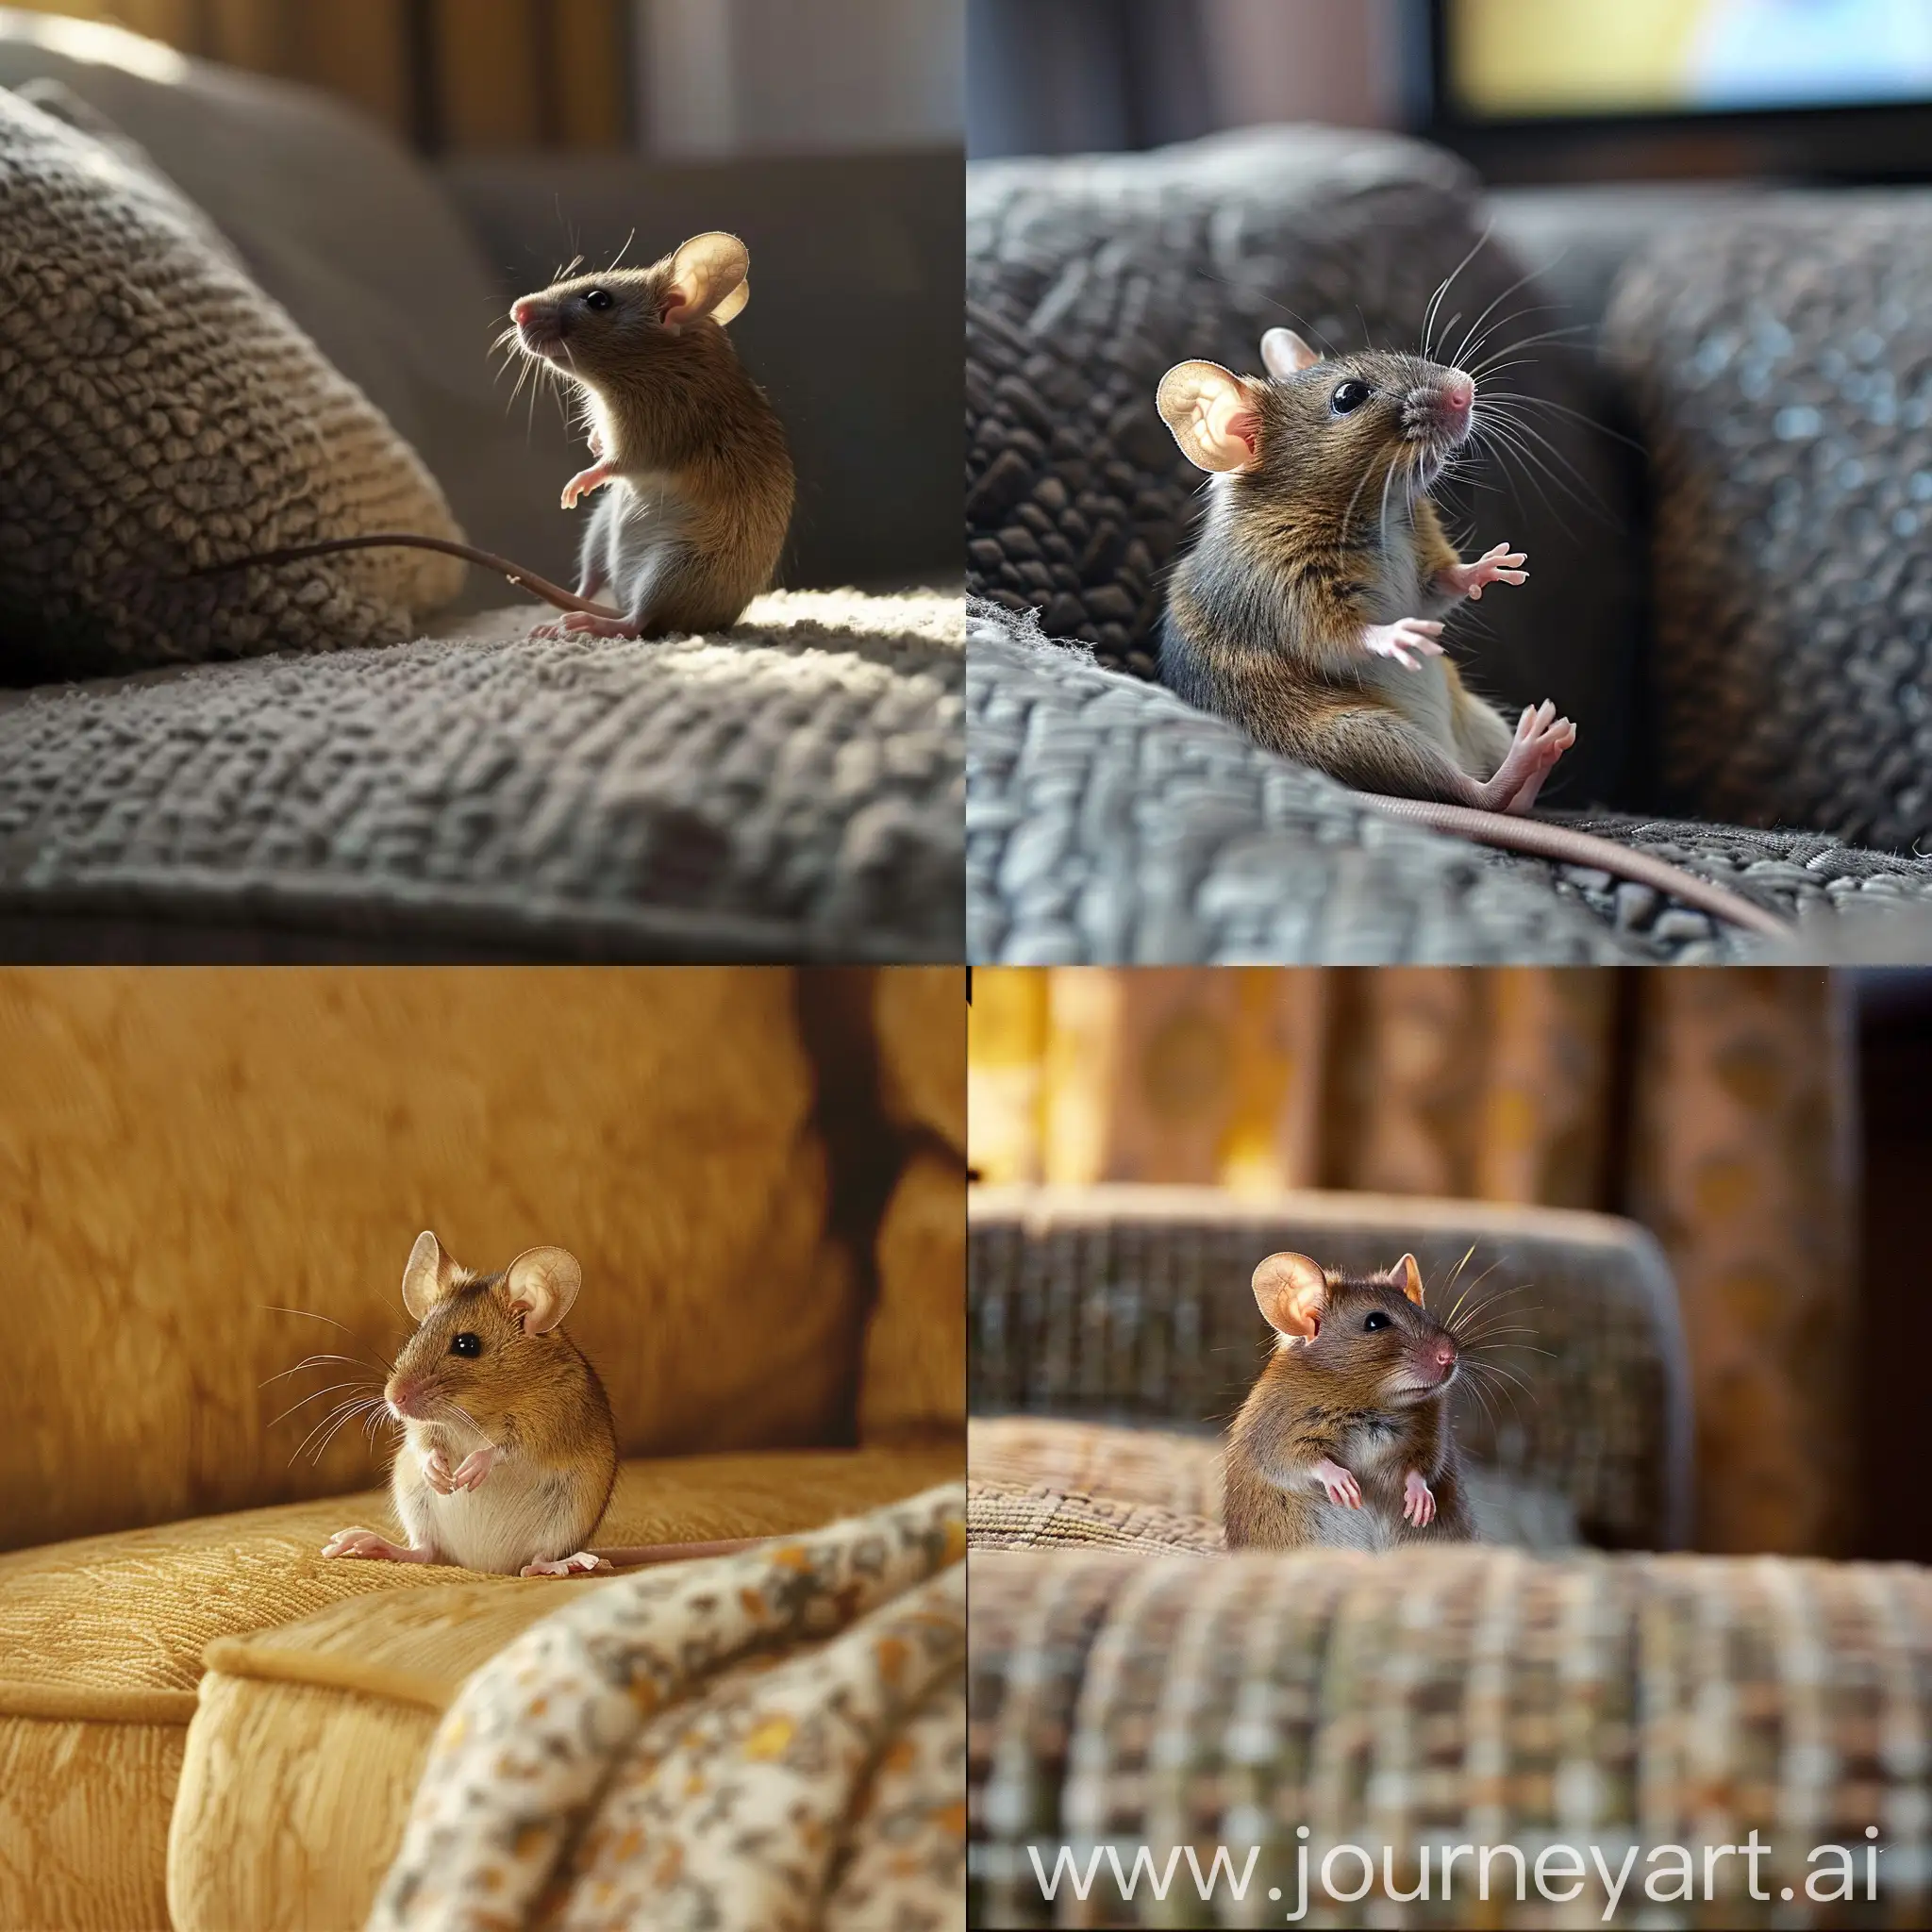 Mouse-Relaxing-on-Sofa-Watching-TV-at-Home